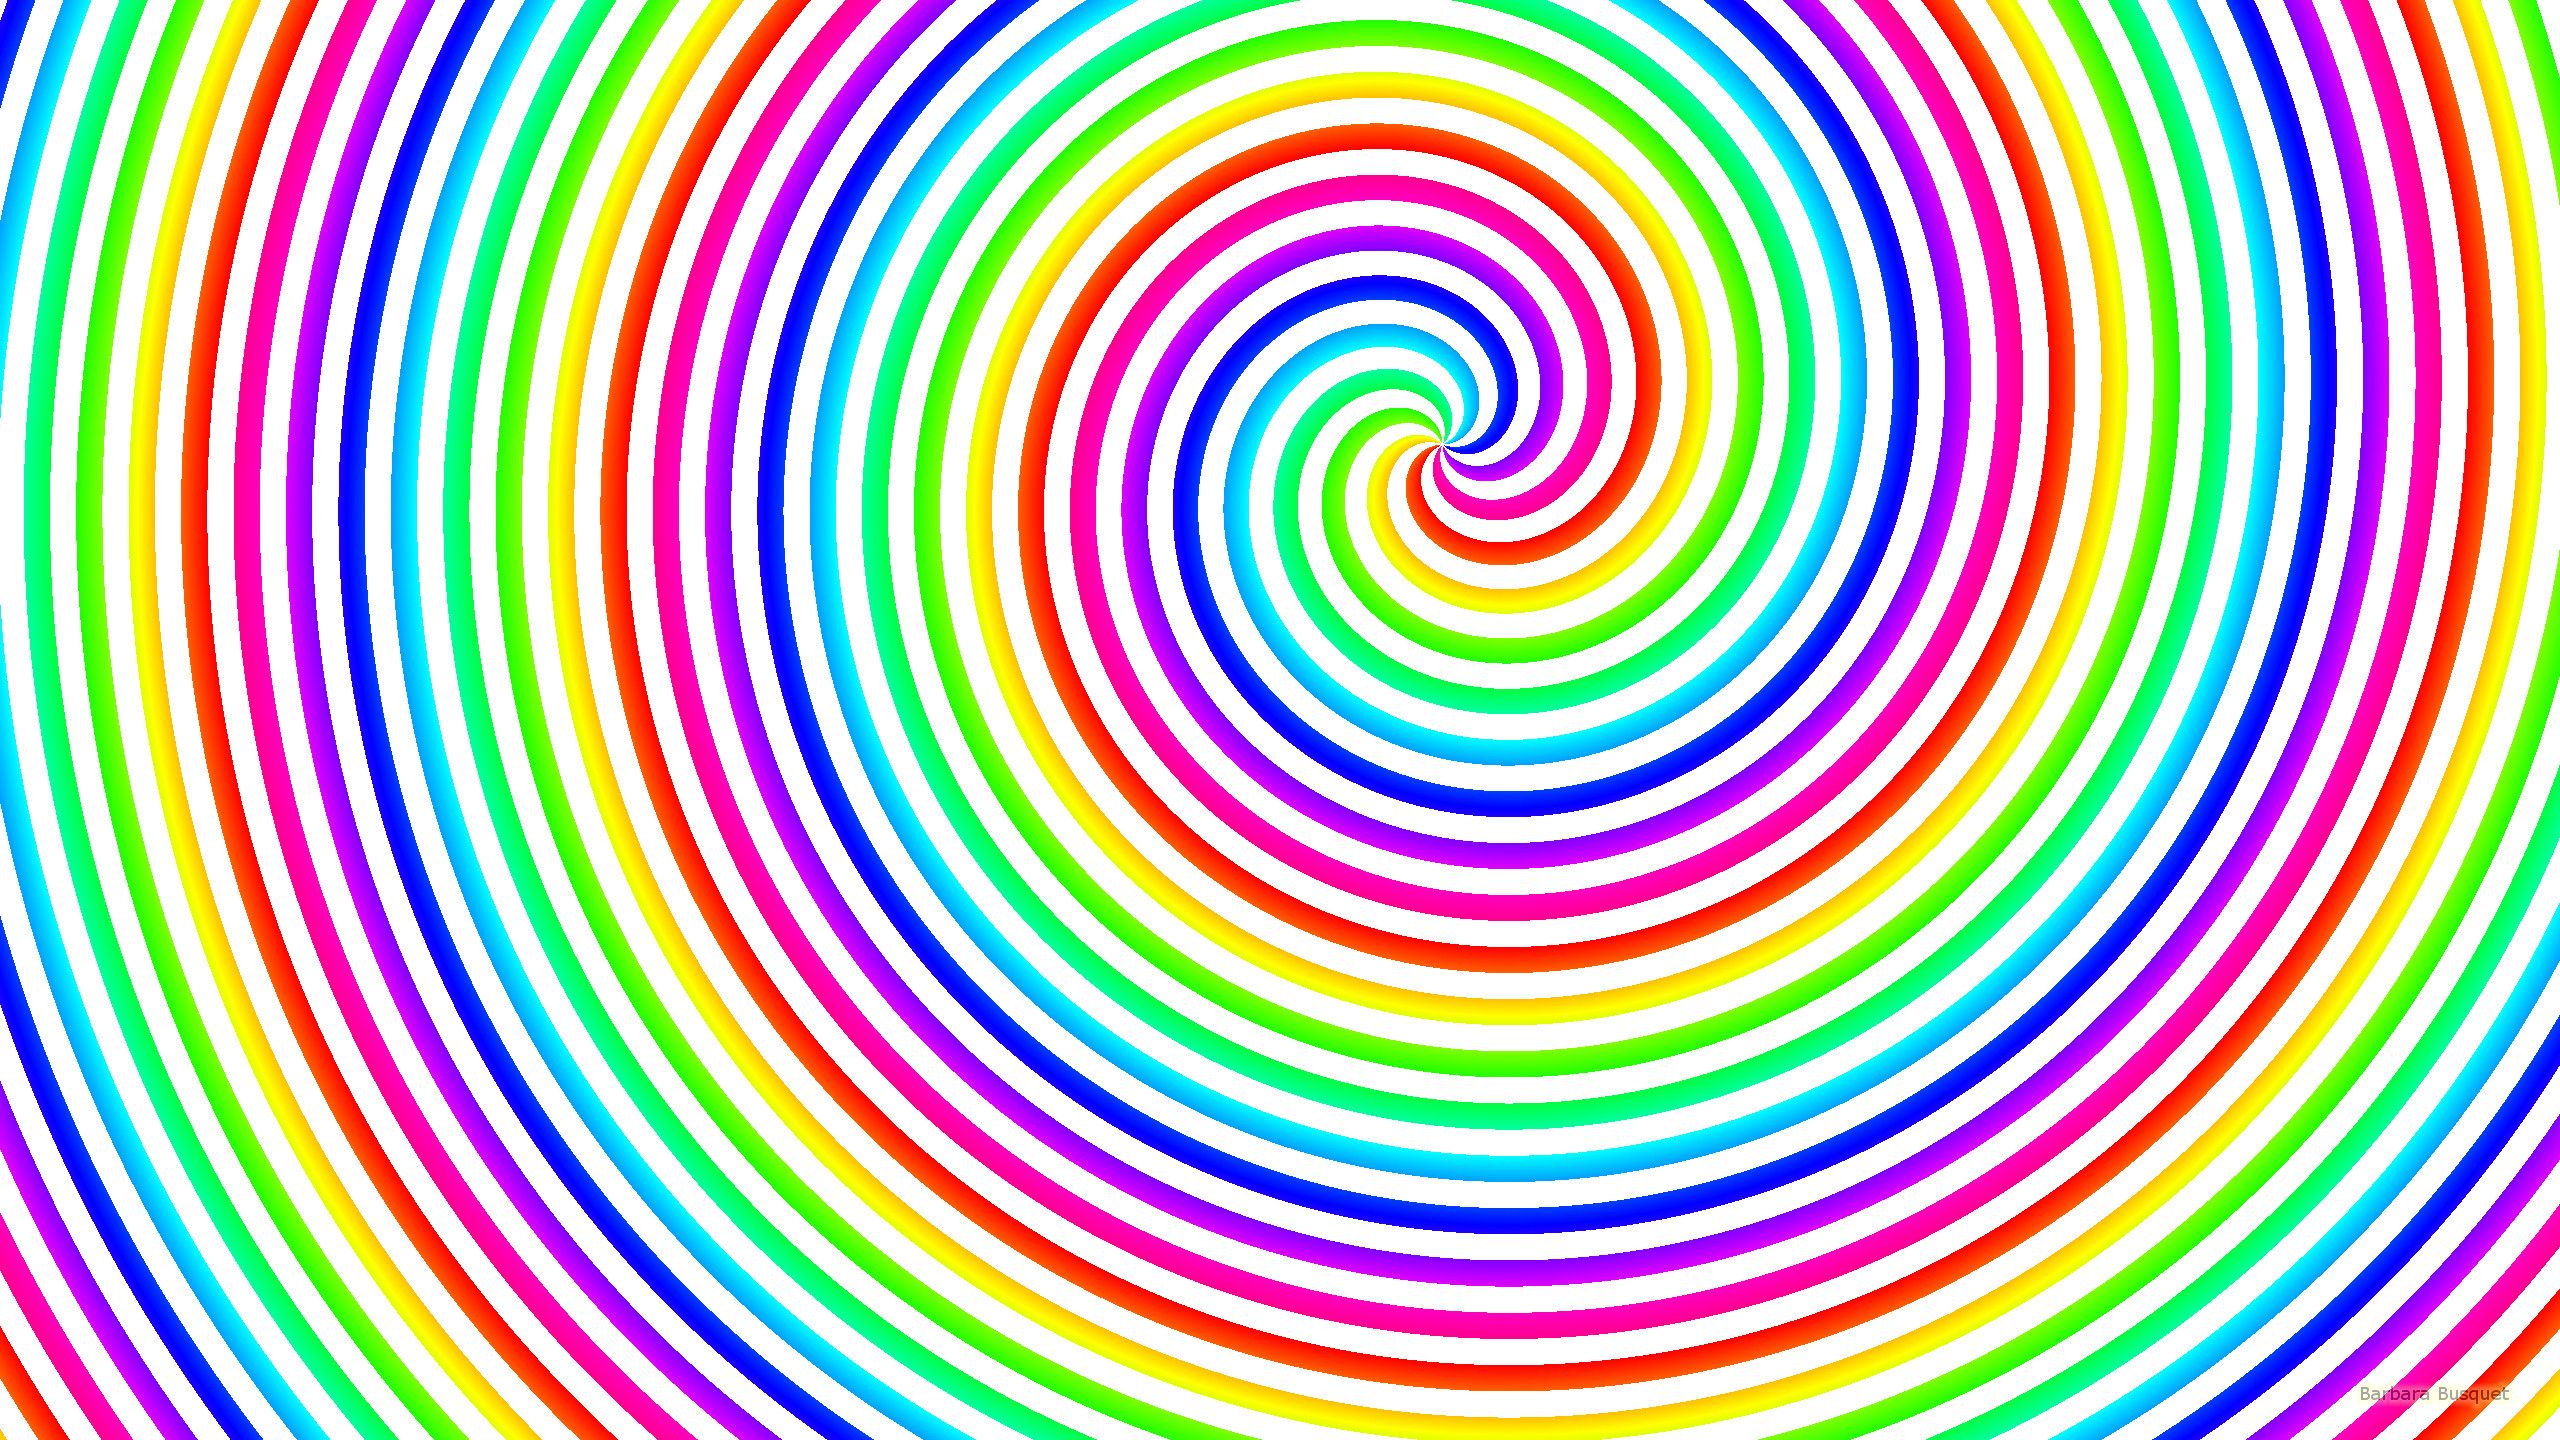 Spiral Rainbow Wallpaper & Background Beautiful Best Available For Download Spiral Rainbow Photo Free On Zicxa.com Image